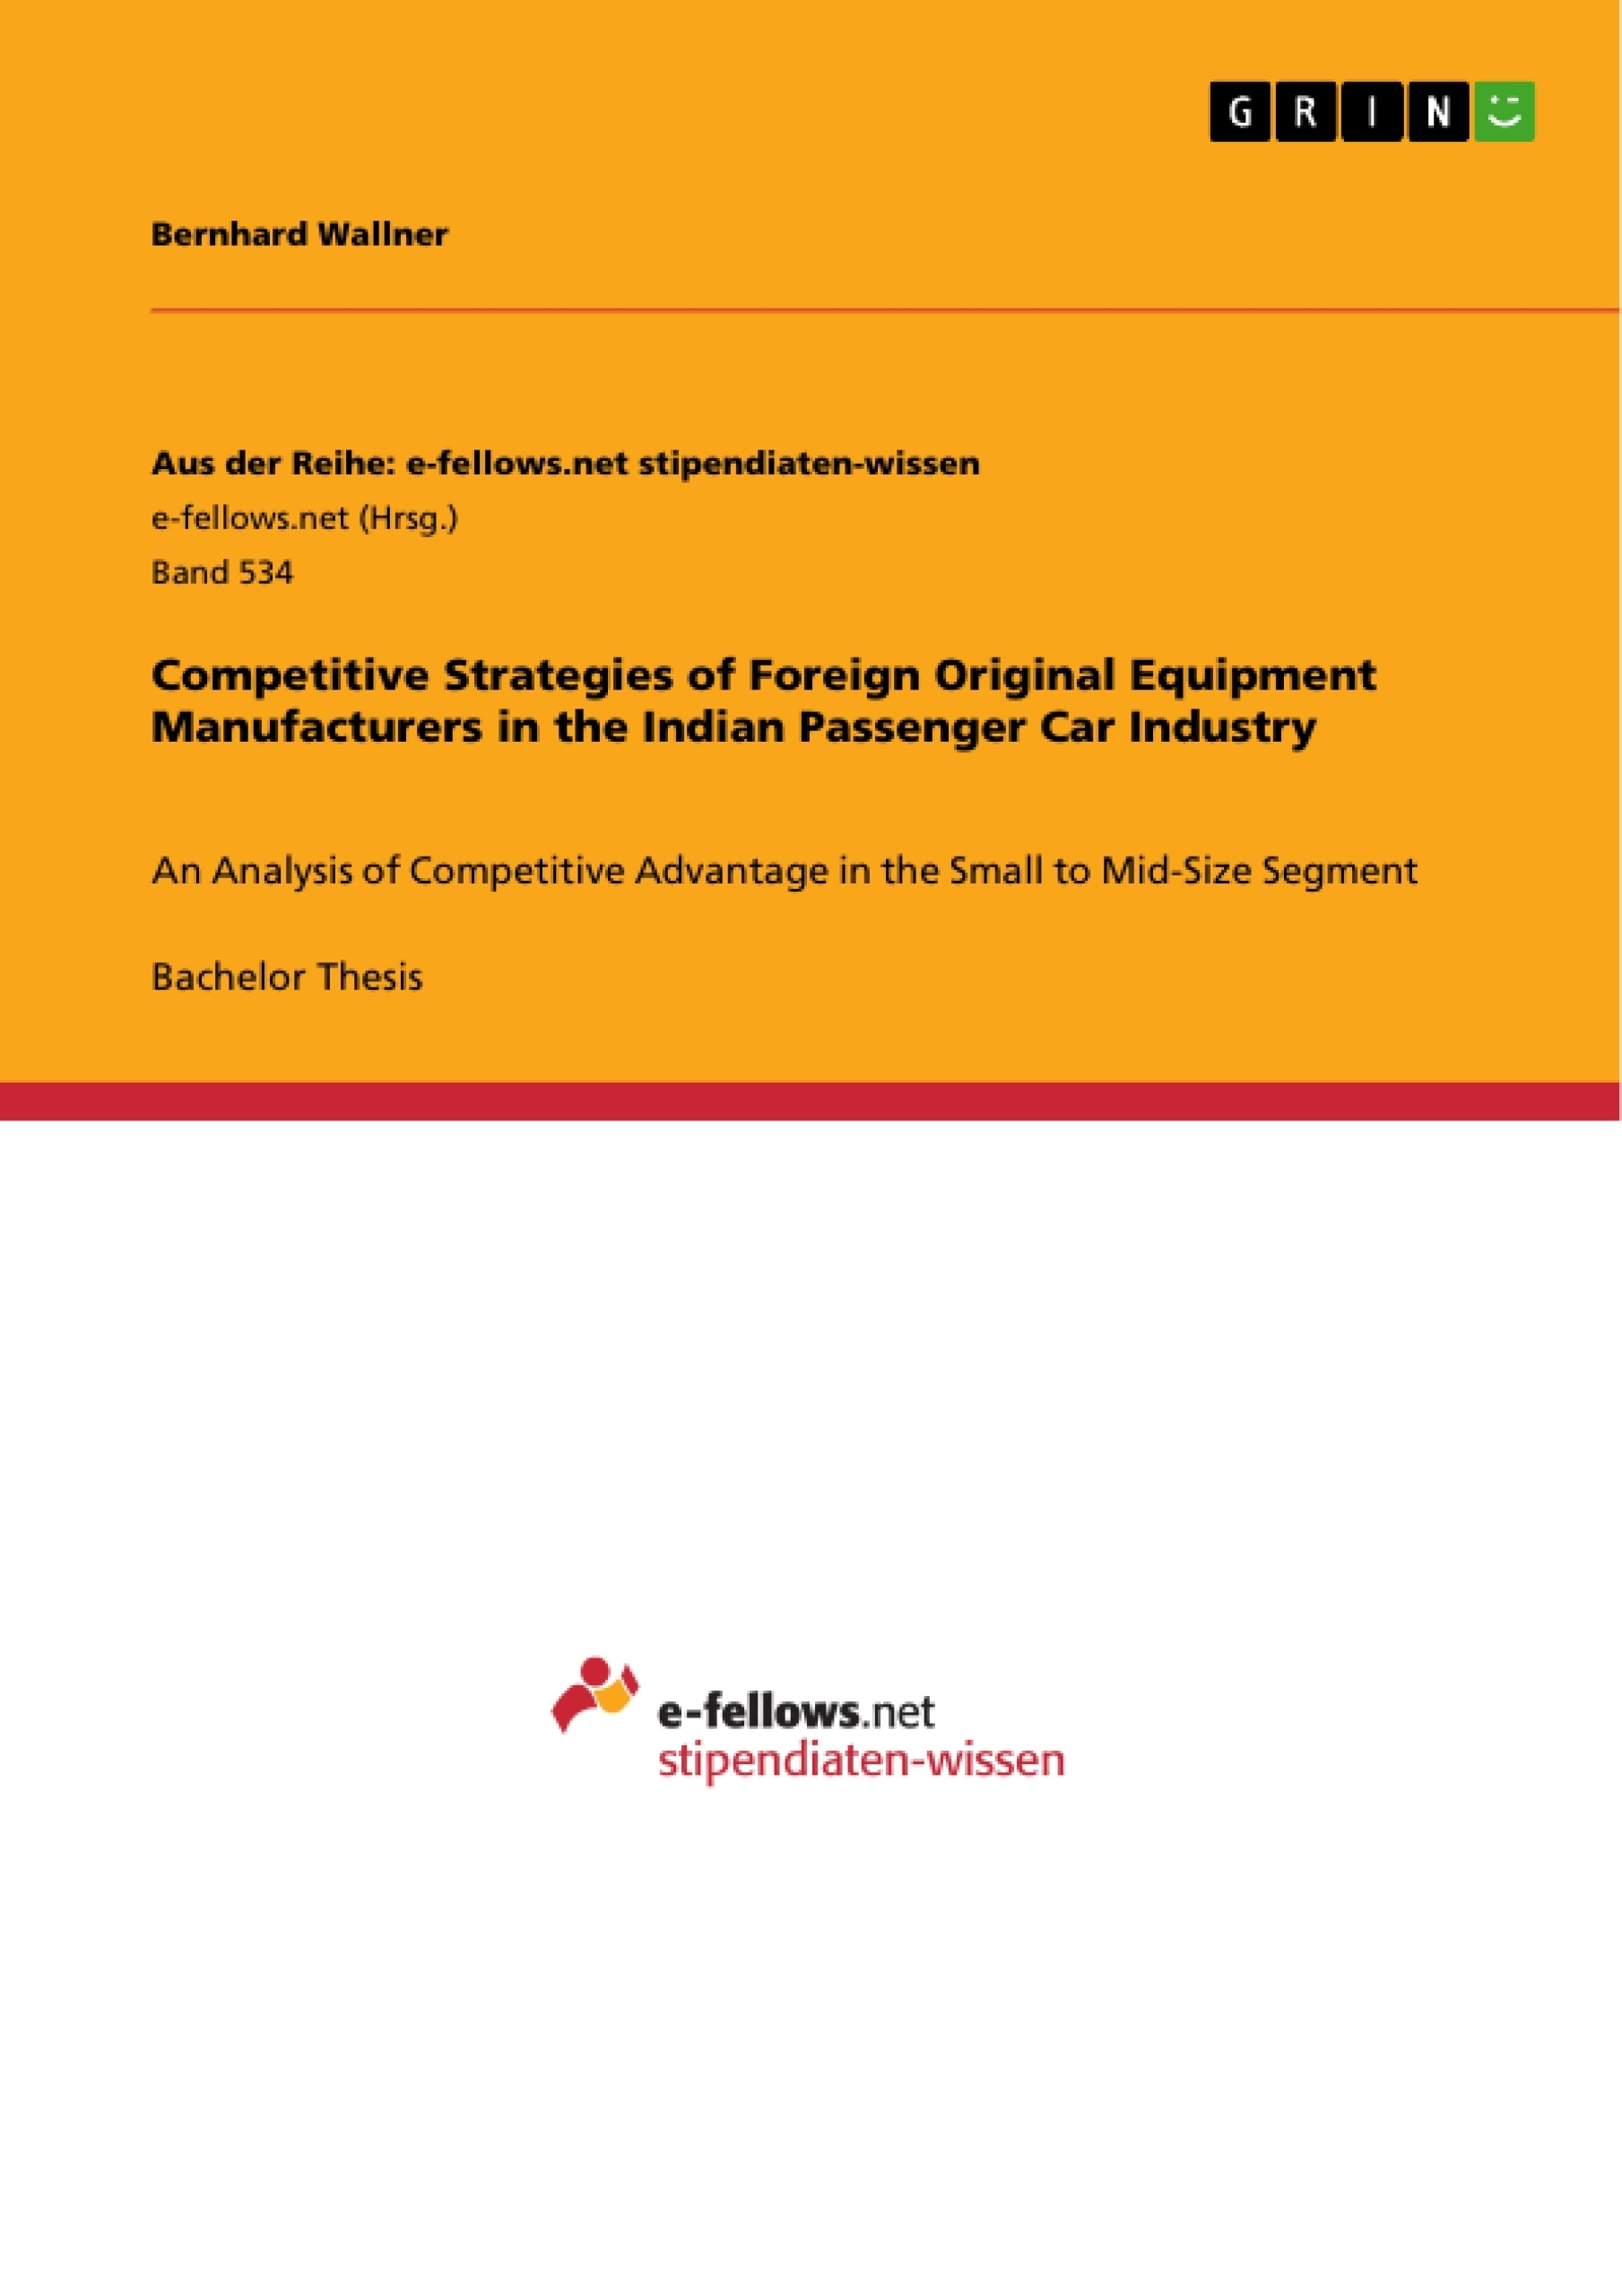 Title: Competitive Strategies of Foreign Original Equipment Manufacturers in the Indian Passenger Car Industry